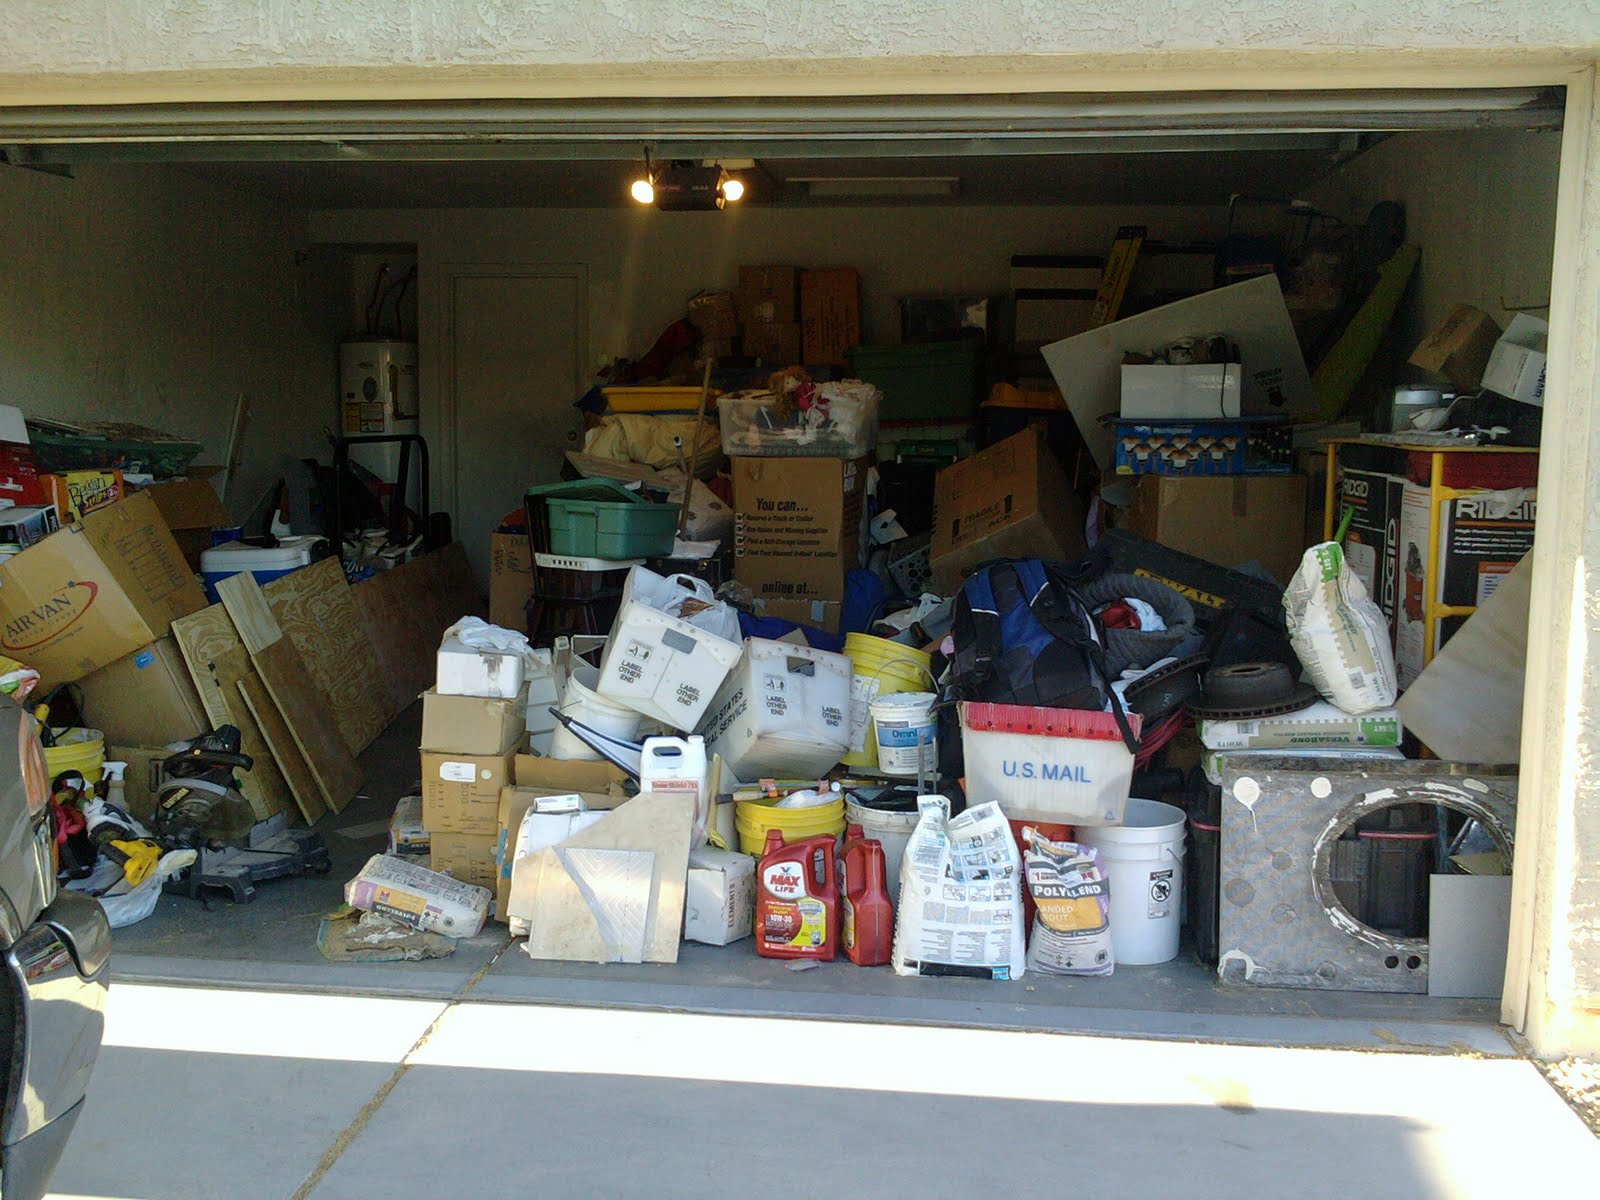  wanna park your car in that? &nbsp;didn't think so. &nbsp;get your garage cleaned and organized today! 